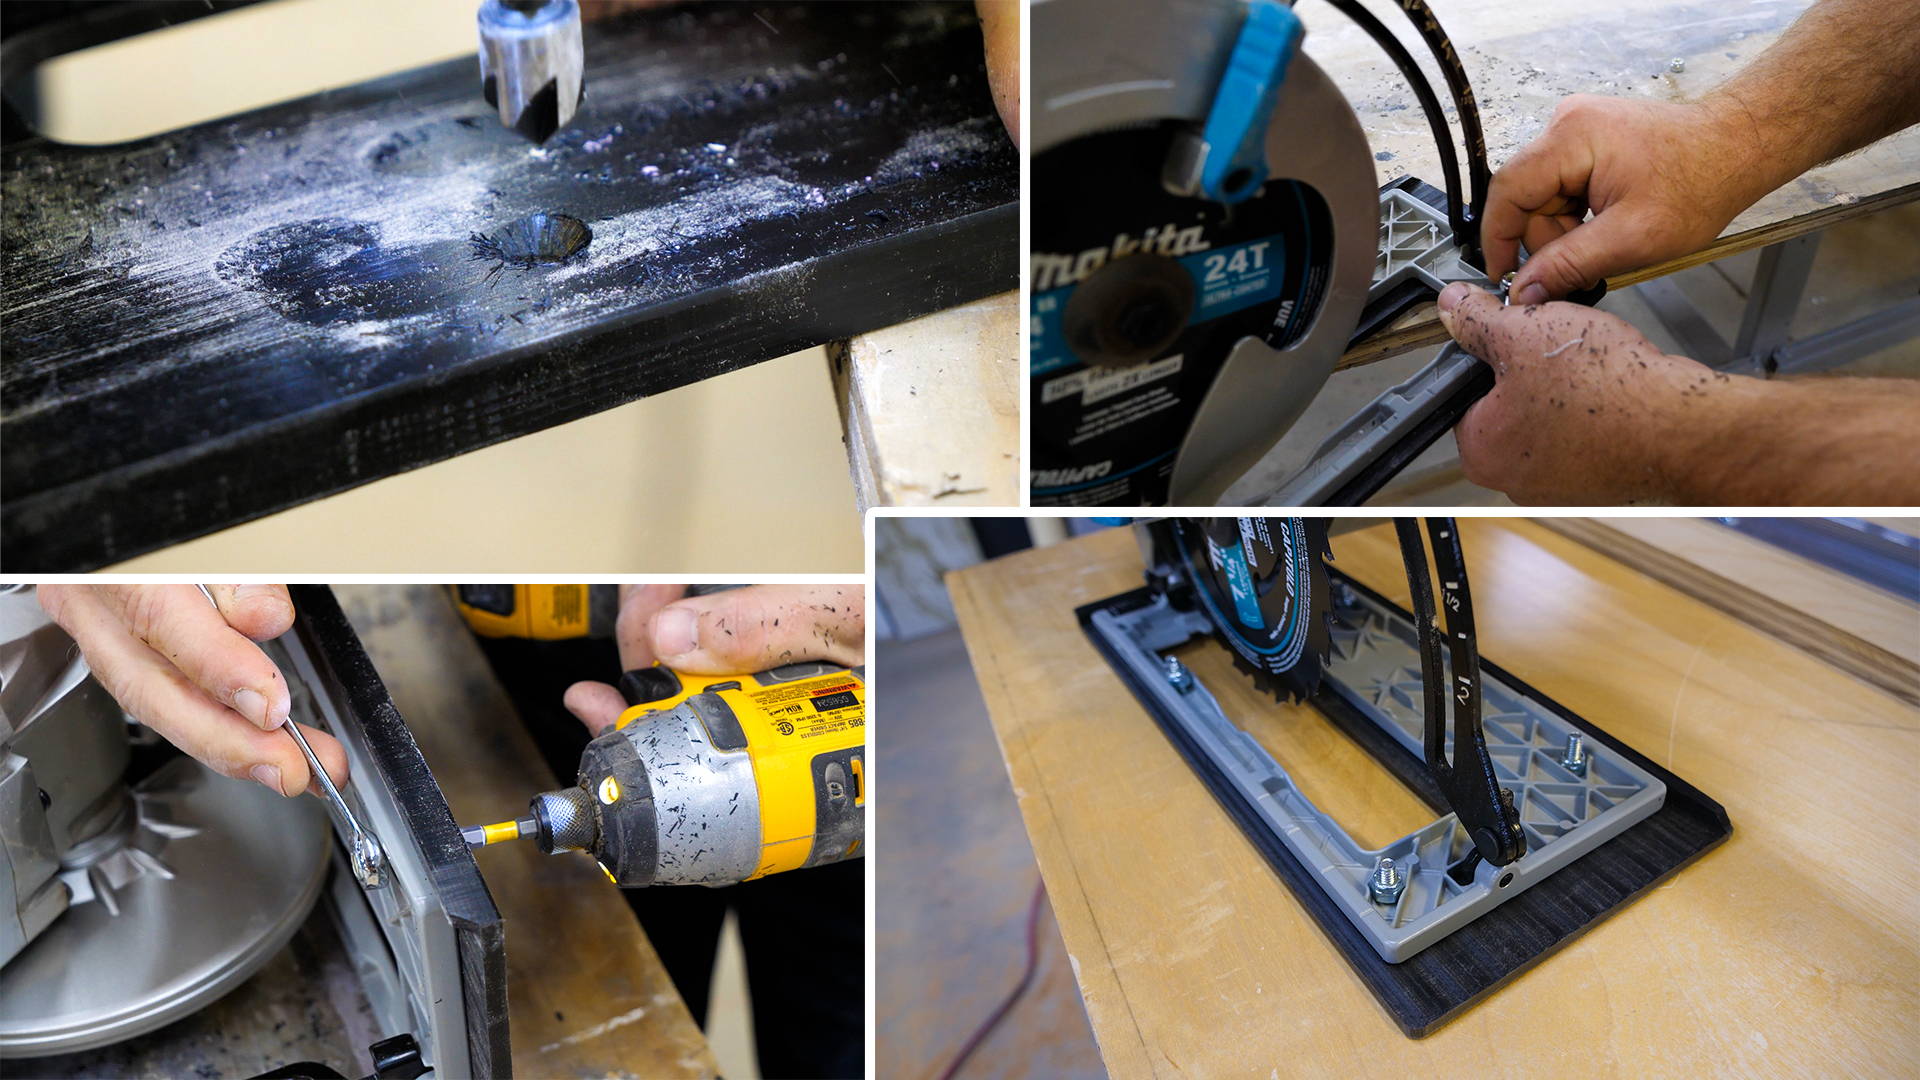 Step #4: Secure base to saw. Slide base into guide, position circular saw, mark and drill holes through the base and saw.